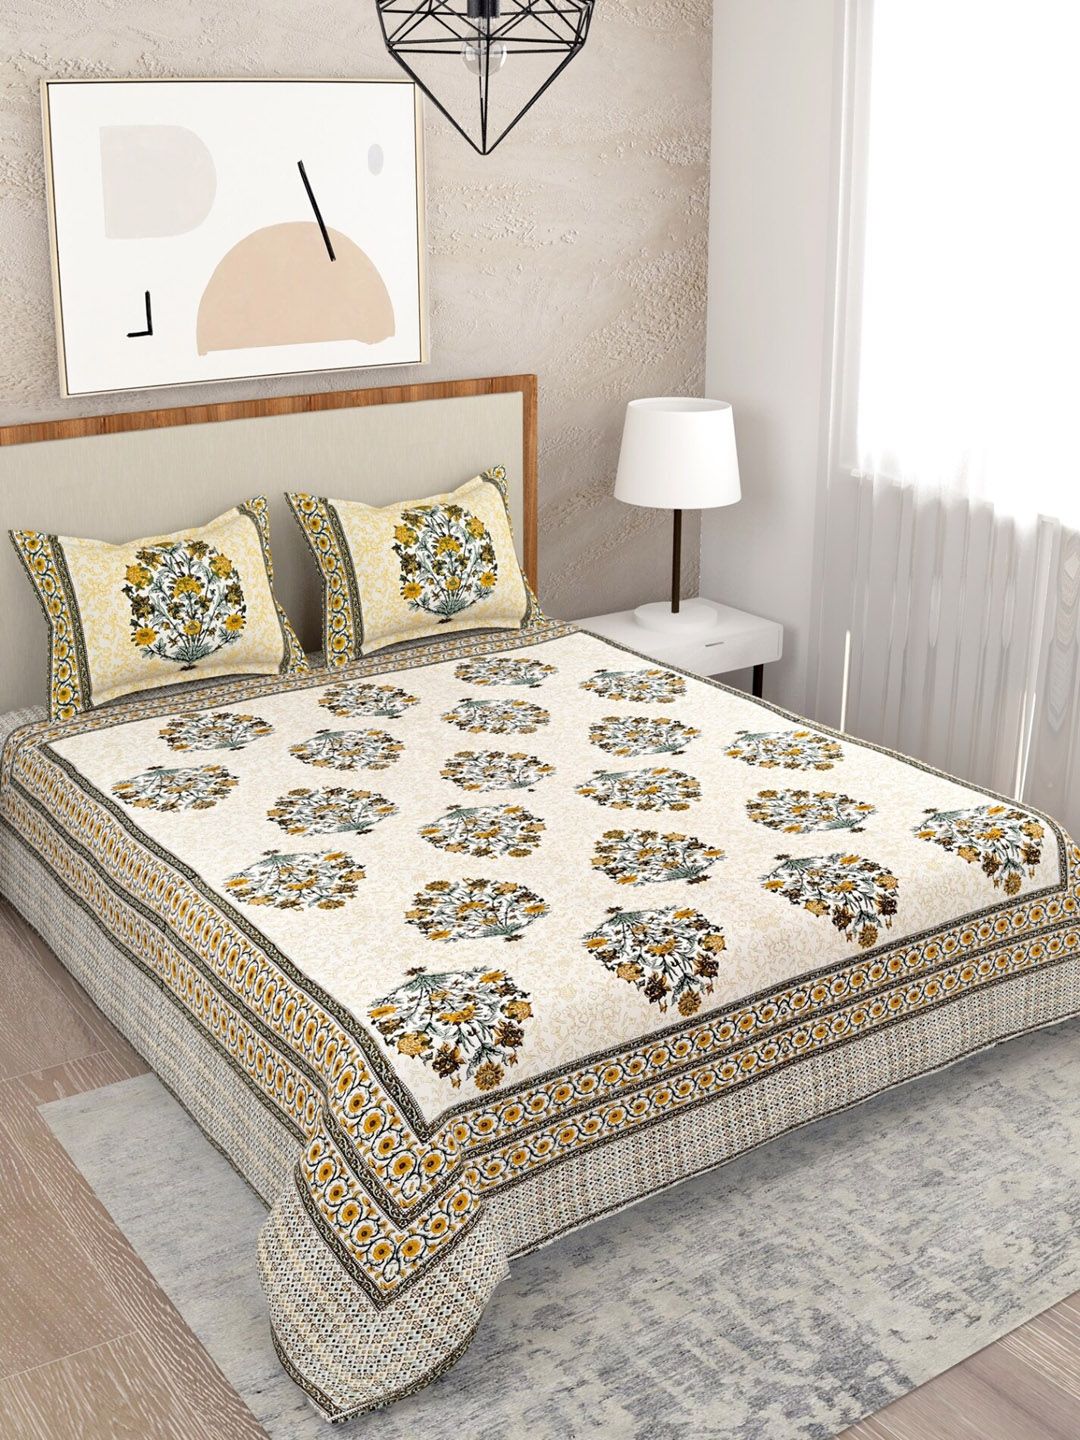 Salona Bichona Beige & Yellow Ethnic Motifs 120 TC Queen Bedsheet with 2 Pillow Covers Price in India